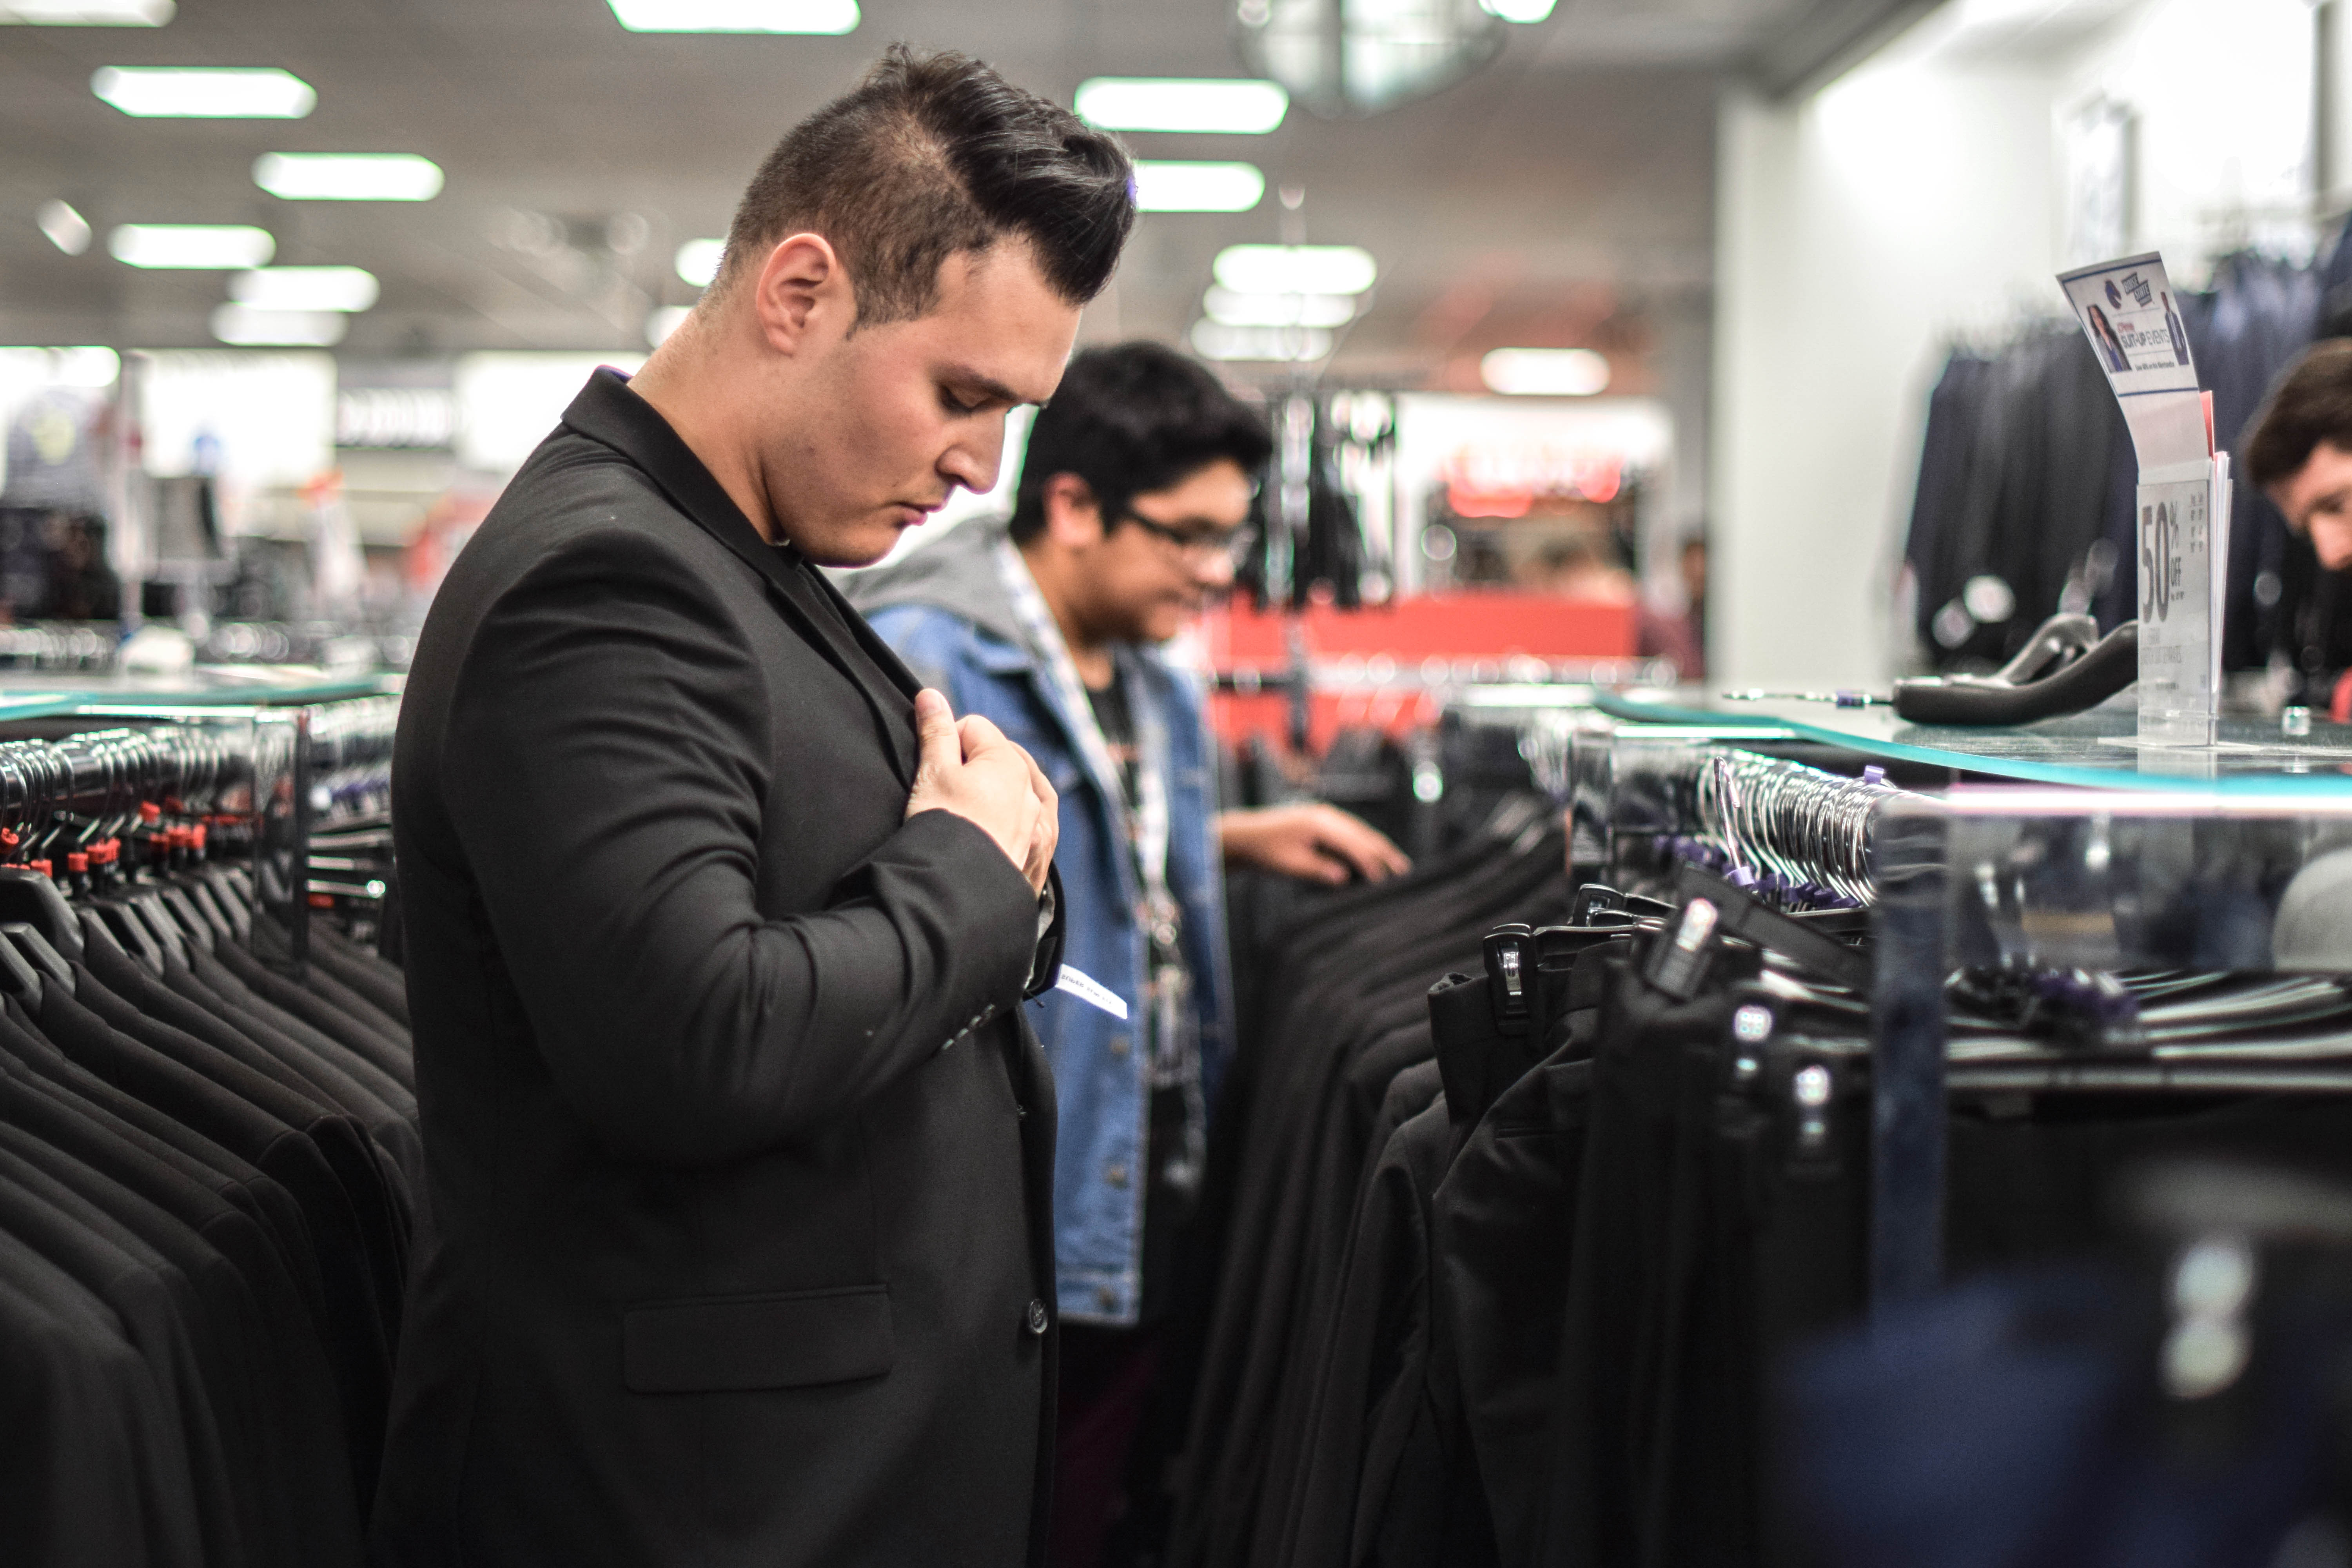 Student trying on clothes at suit up event